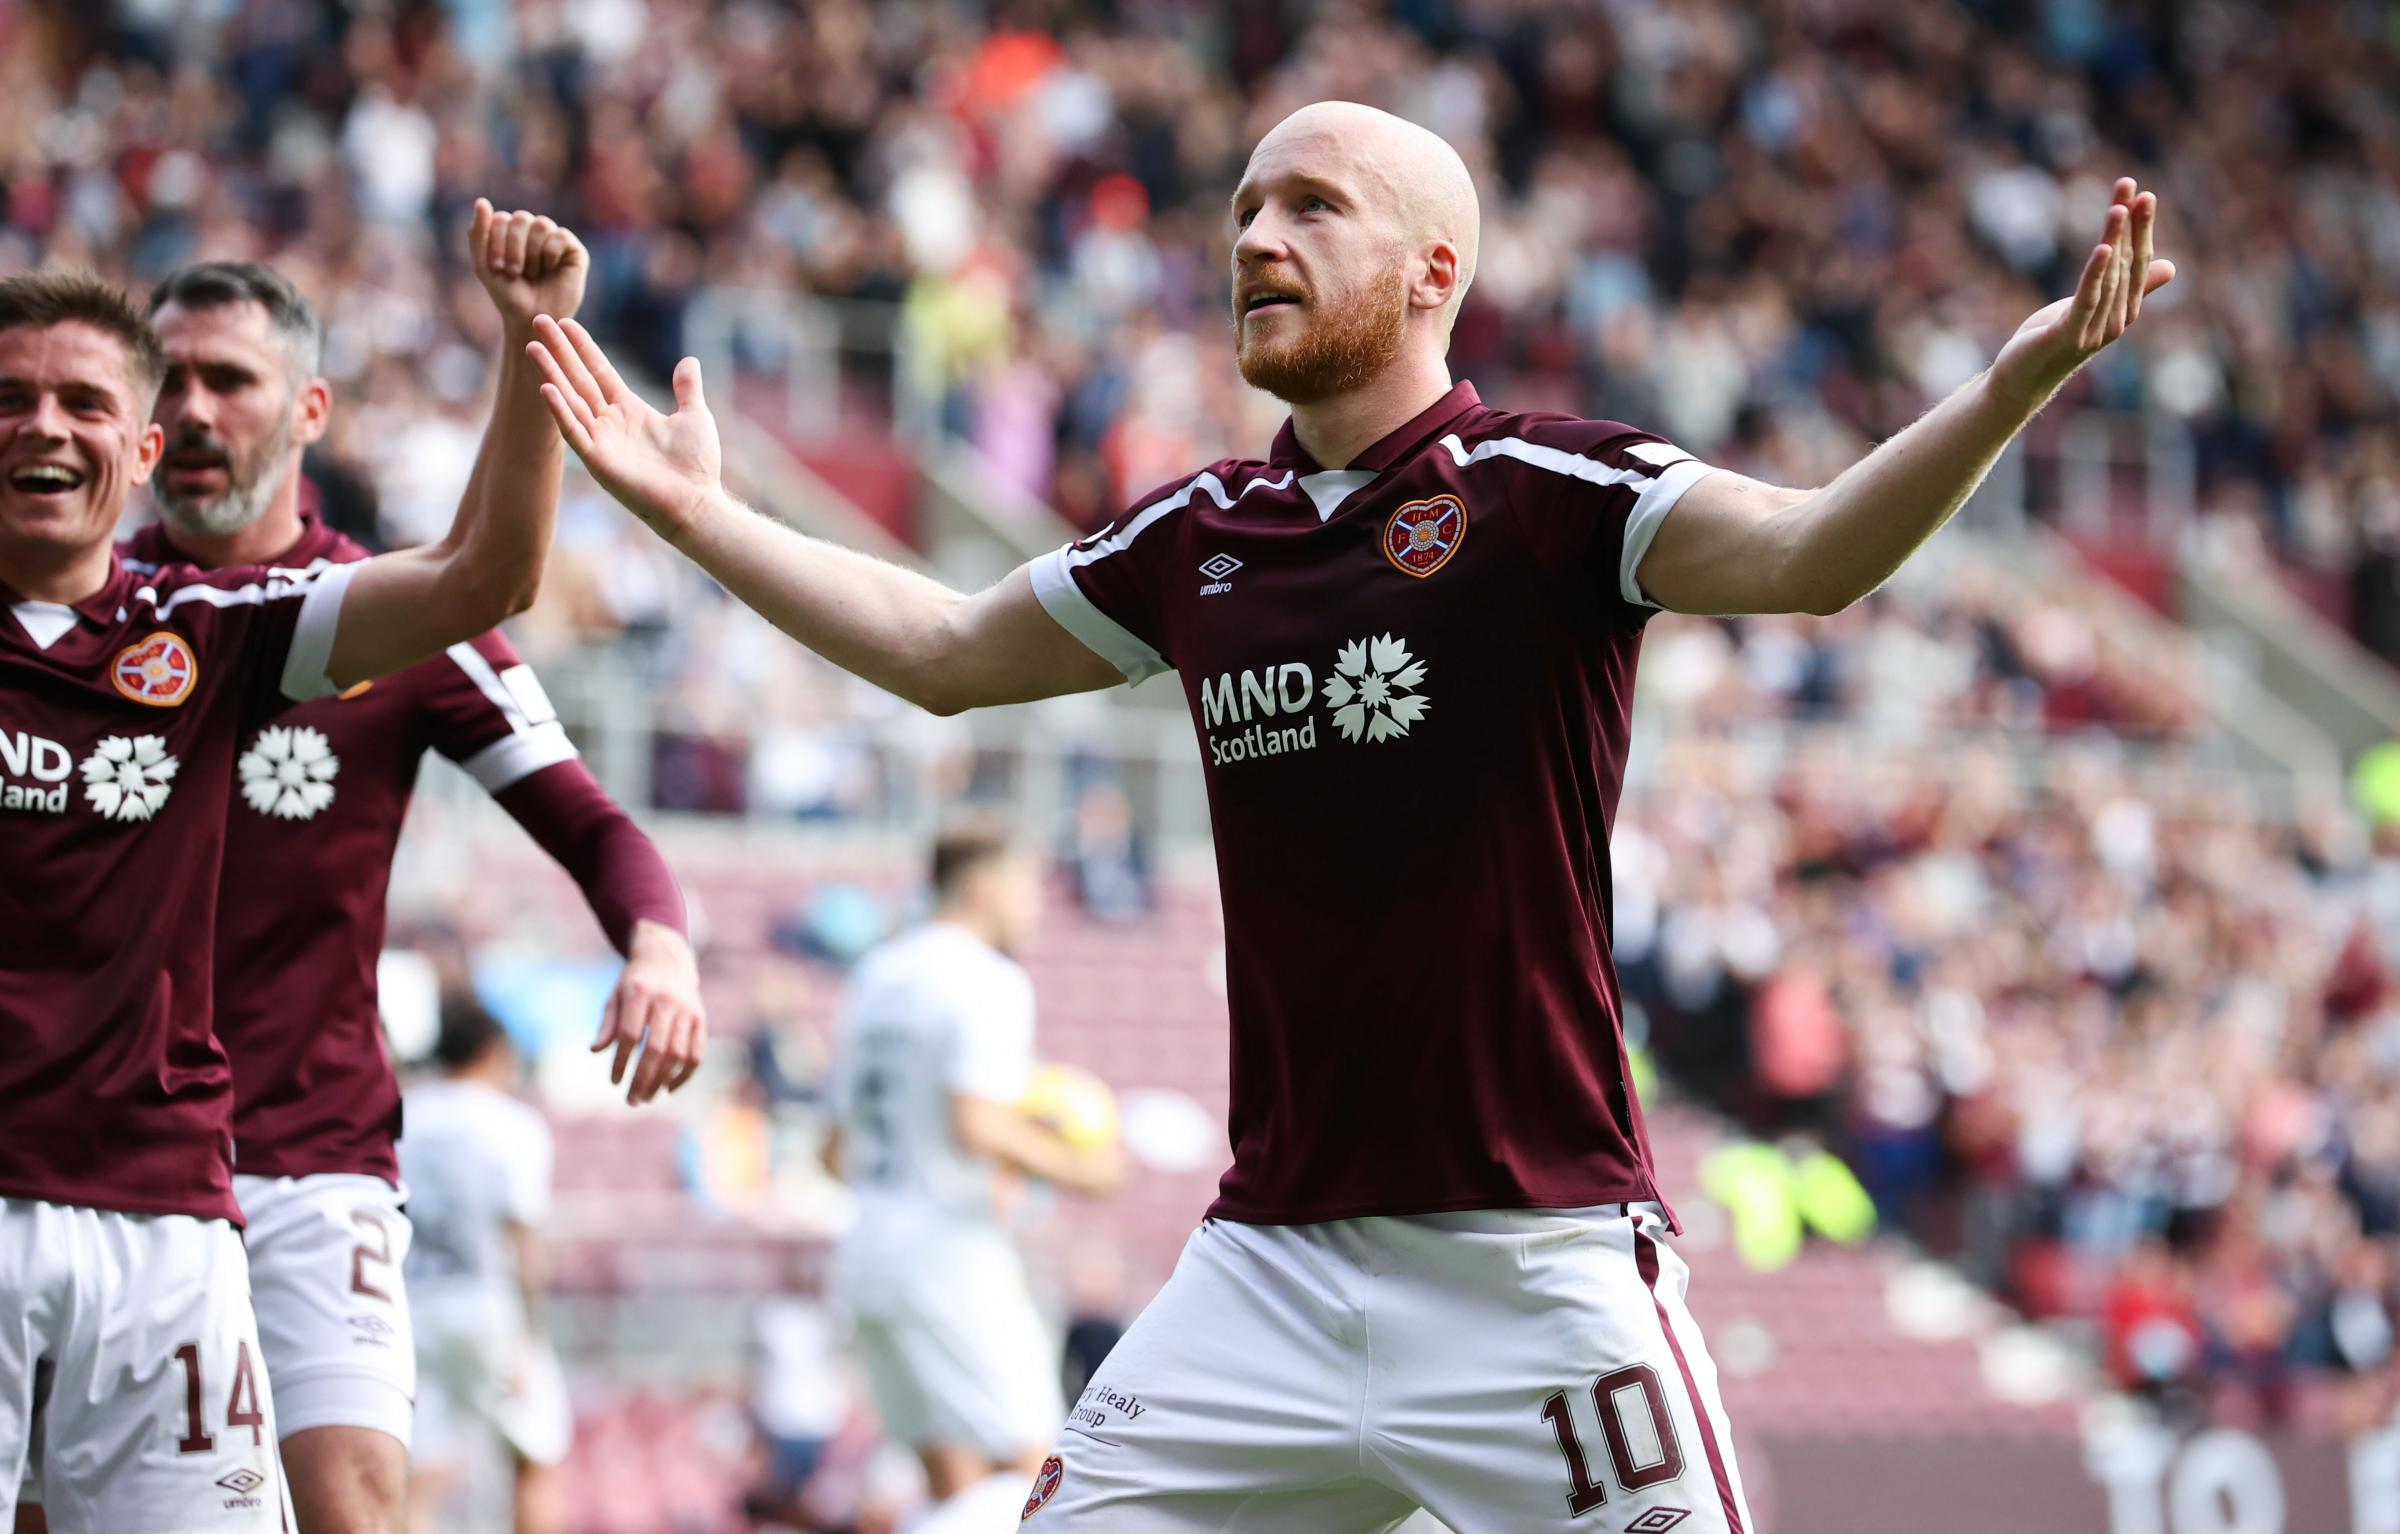 Hearts 3-0 Livingston: Hosts put lethargic Lions to the sword